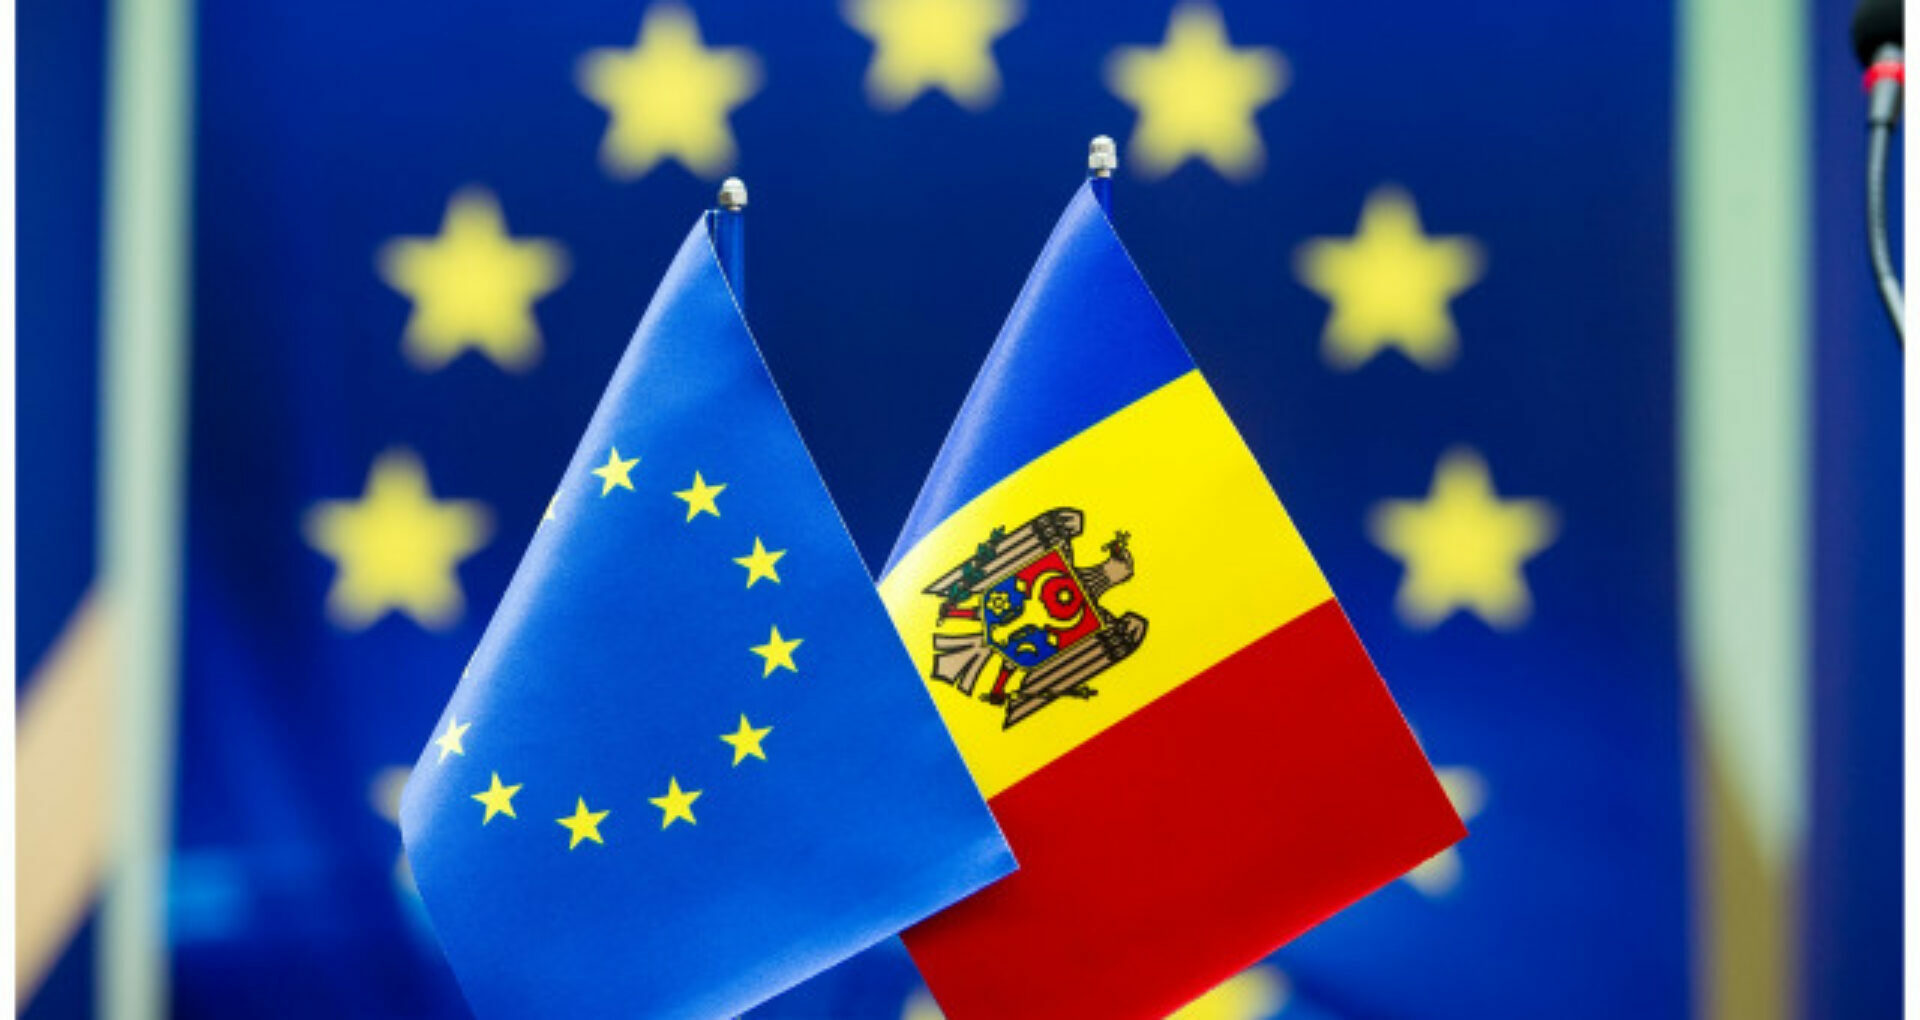 Moldova Received Over €51 Million from the European Union Within Loan Agreement